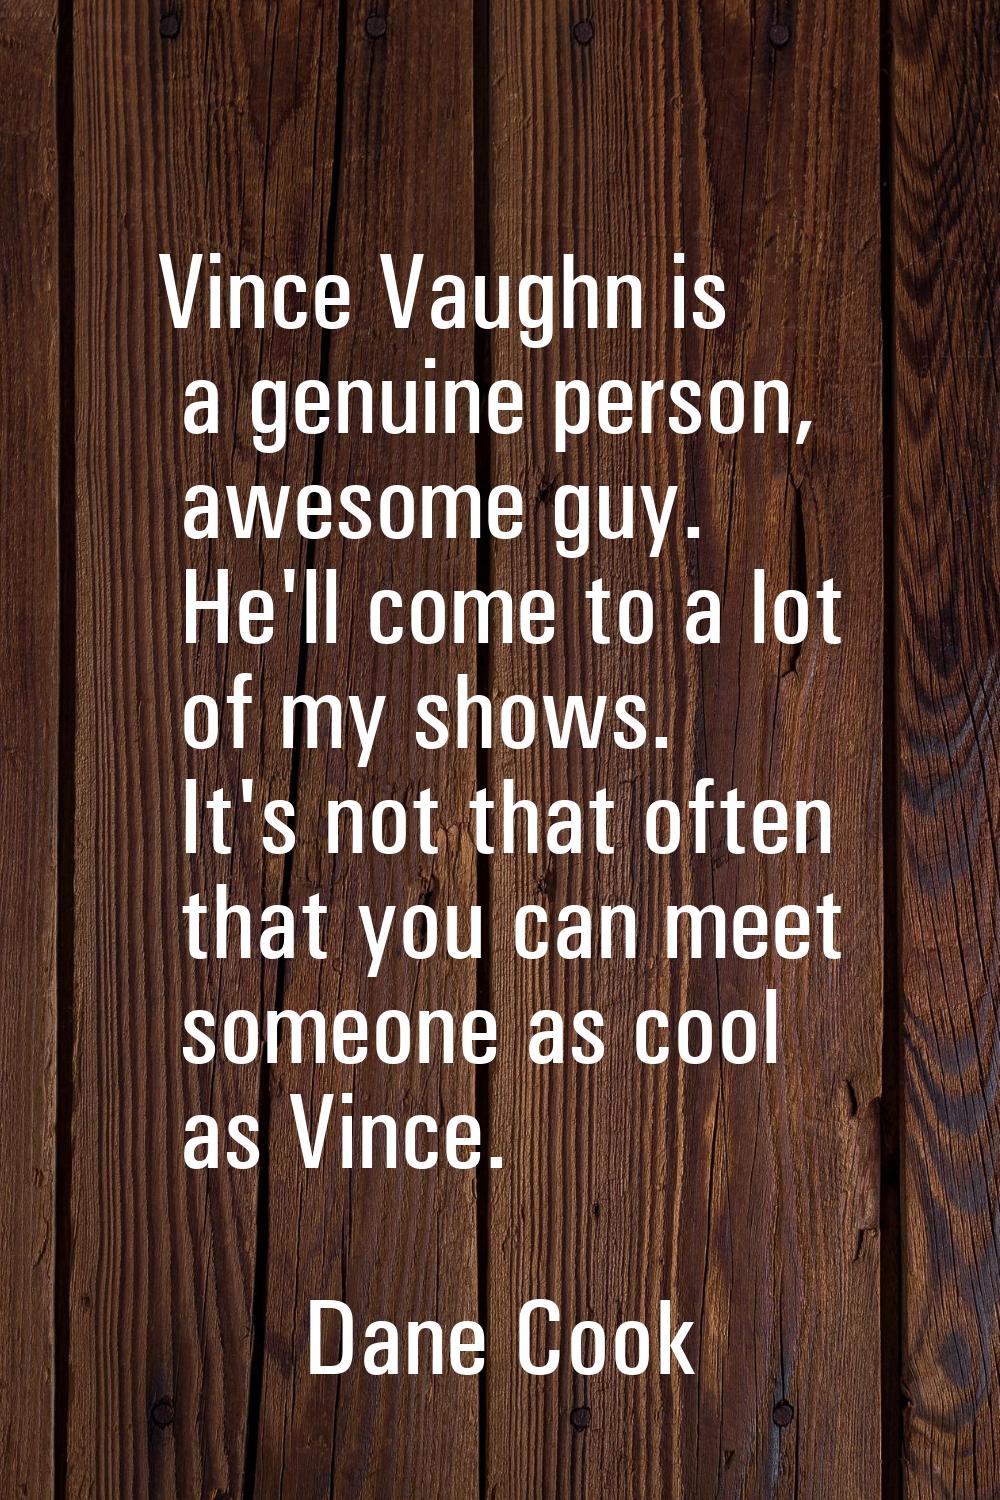 Vince Vaughn is a genuine person, awesome guy. He'll come to a lot of my shows. It's not that often